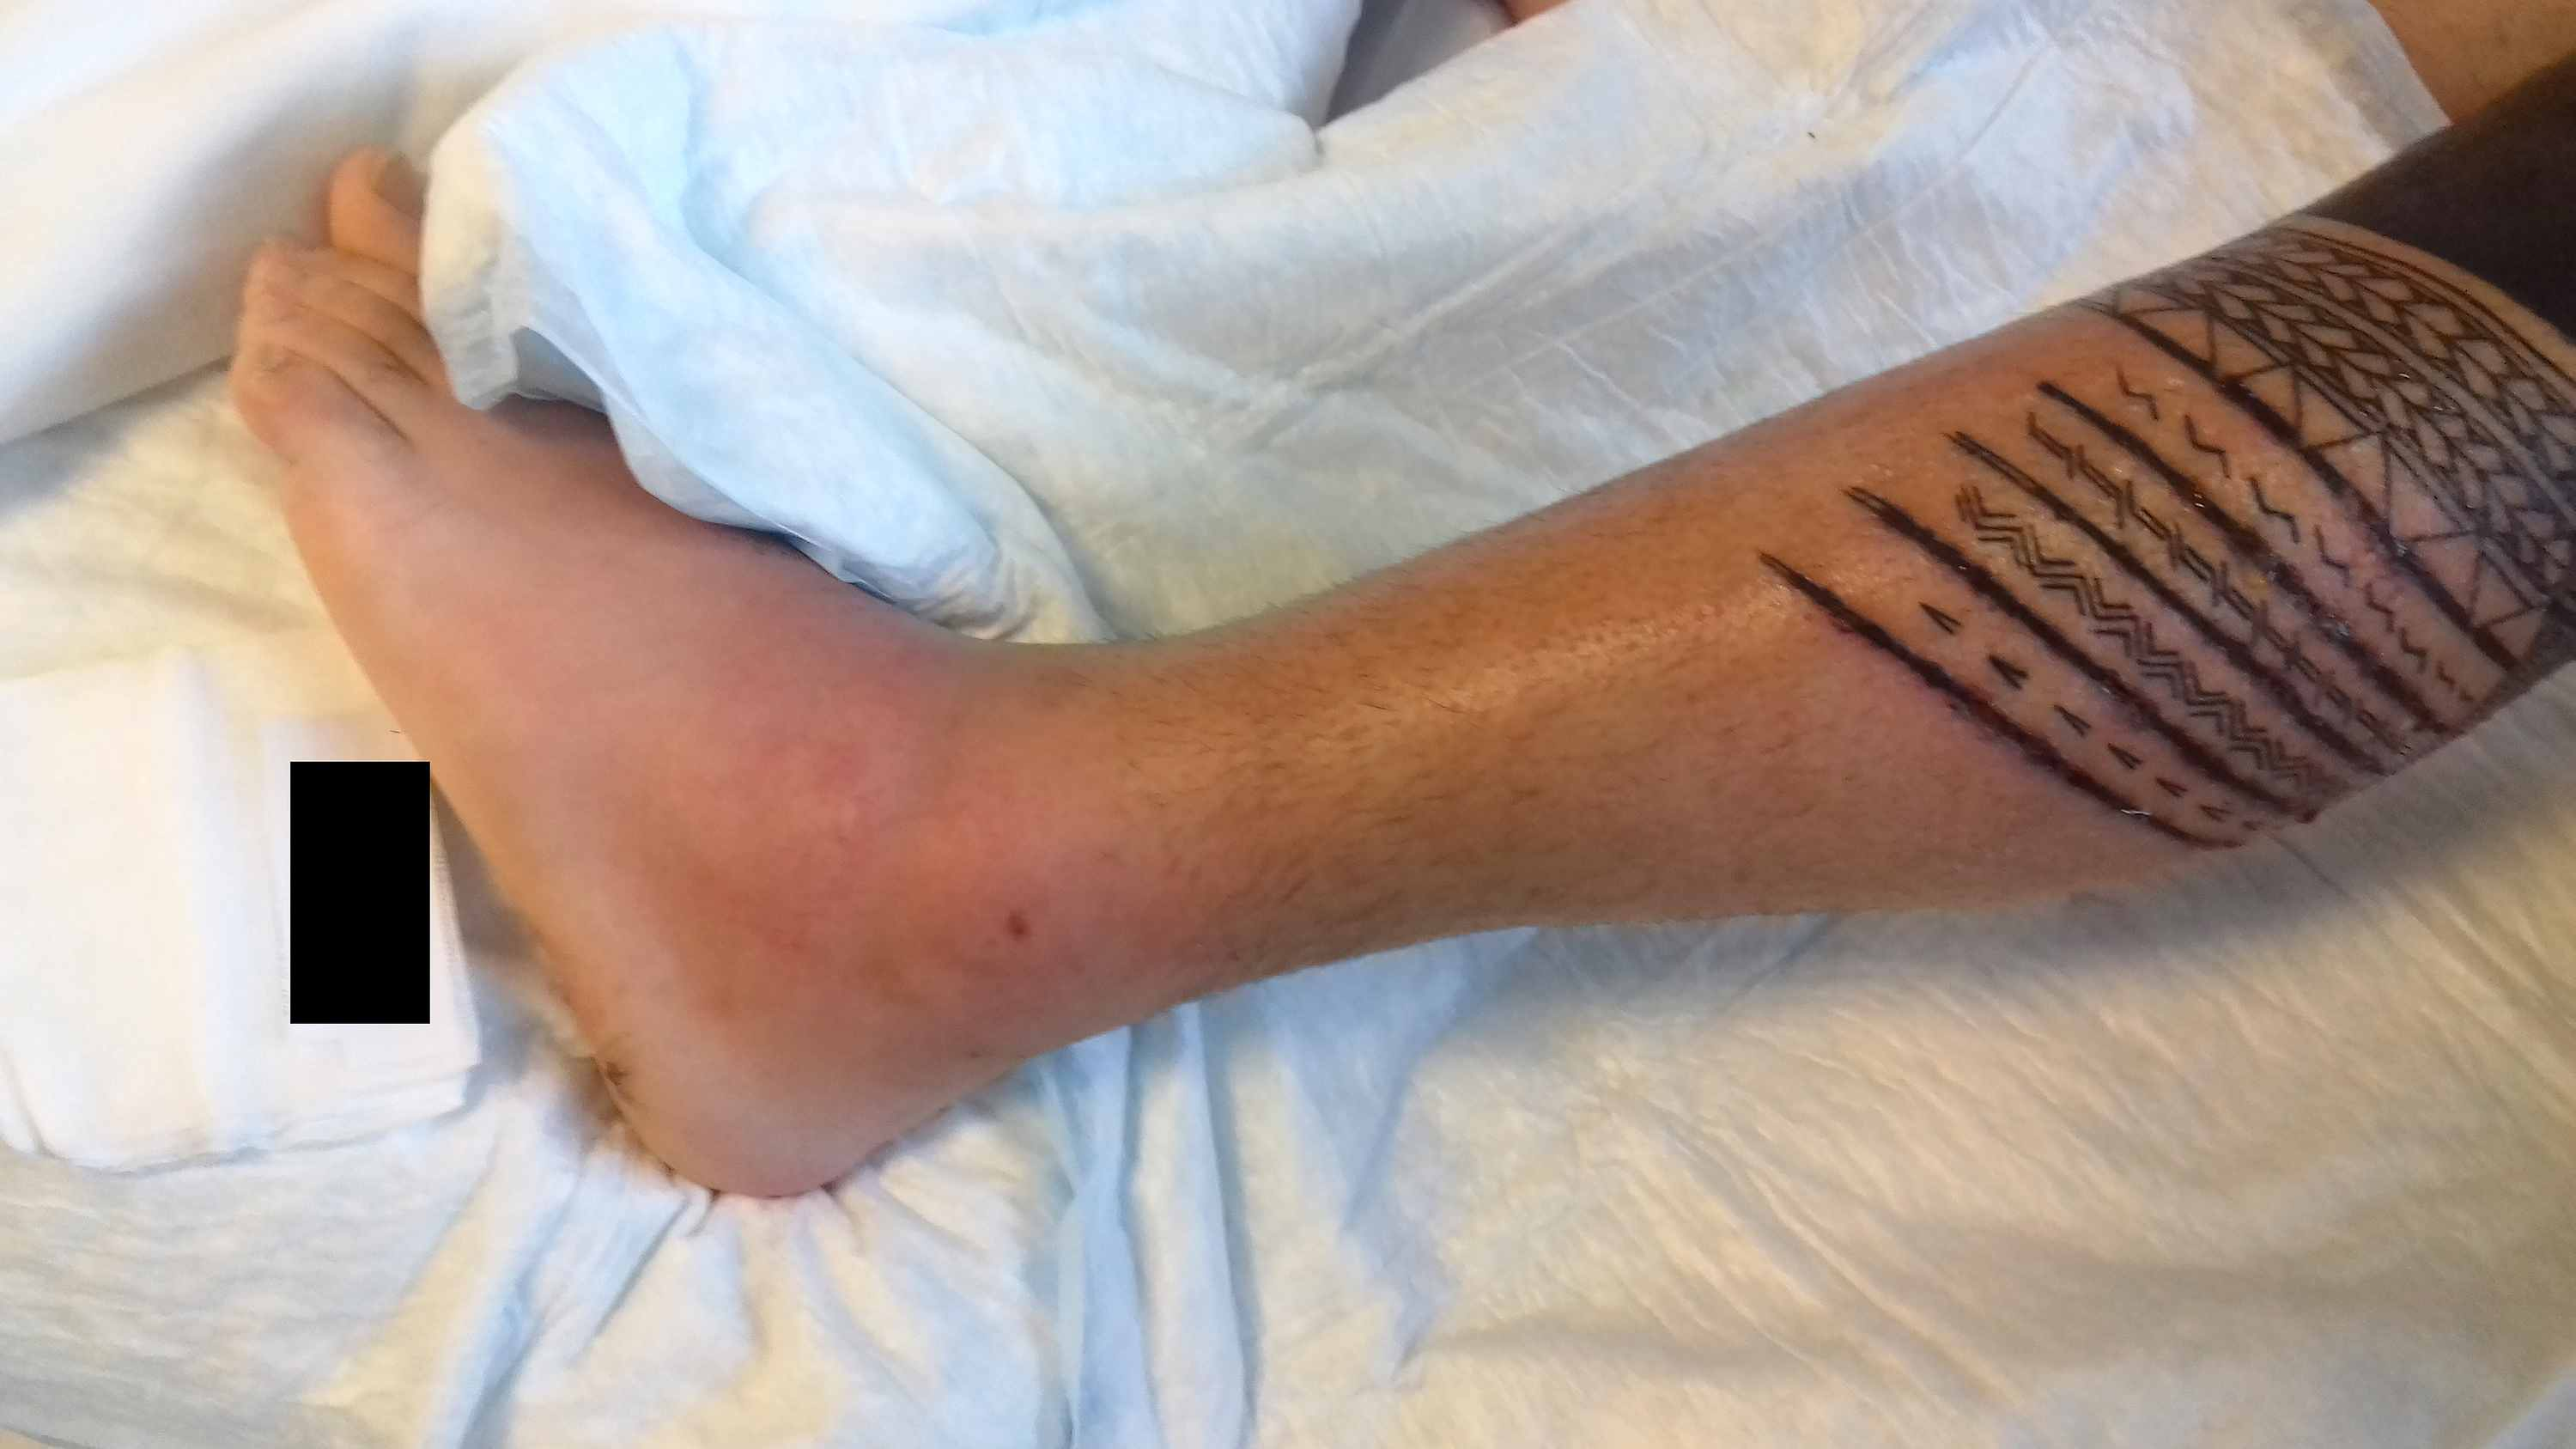 Cureus | Legal Tattoo Complicated by Sepsis and Necrotizing Fasciitis  Requiring Acute Surgery | Article